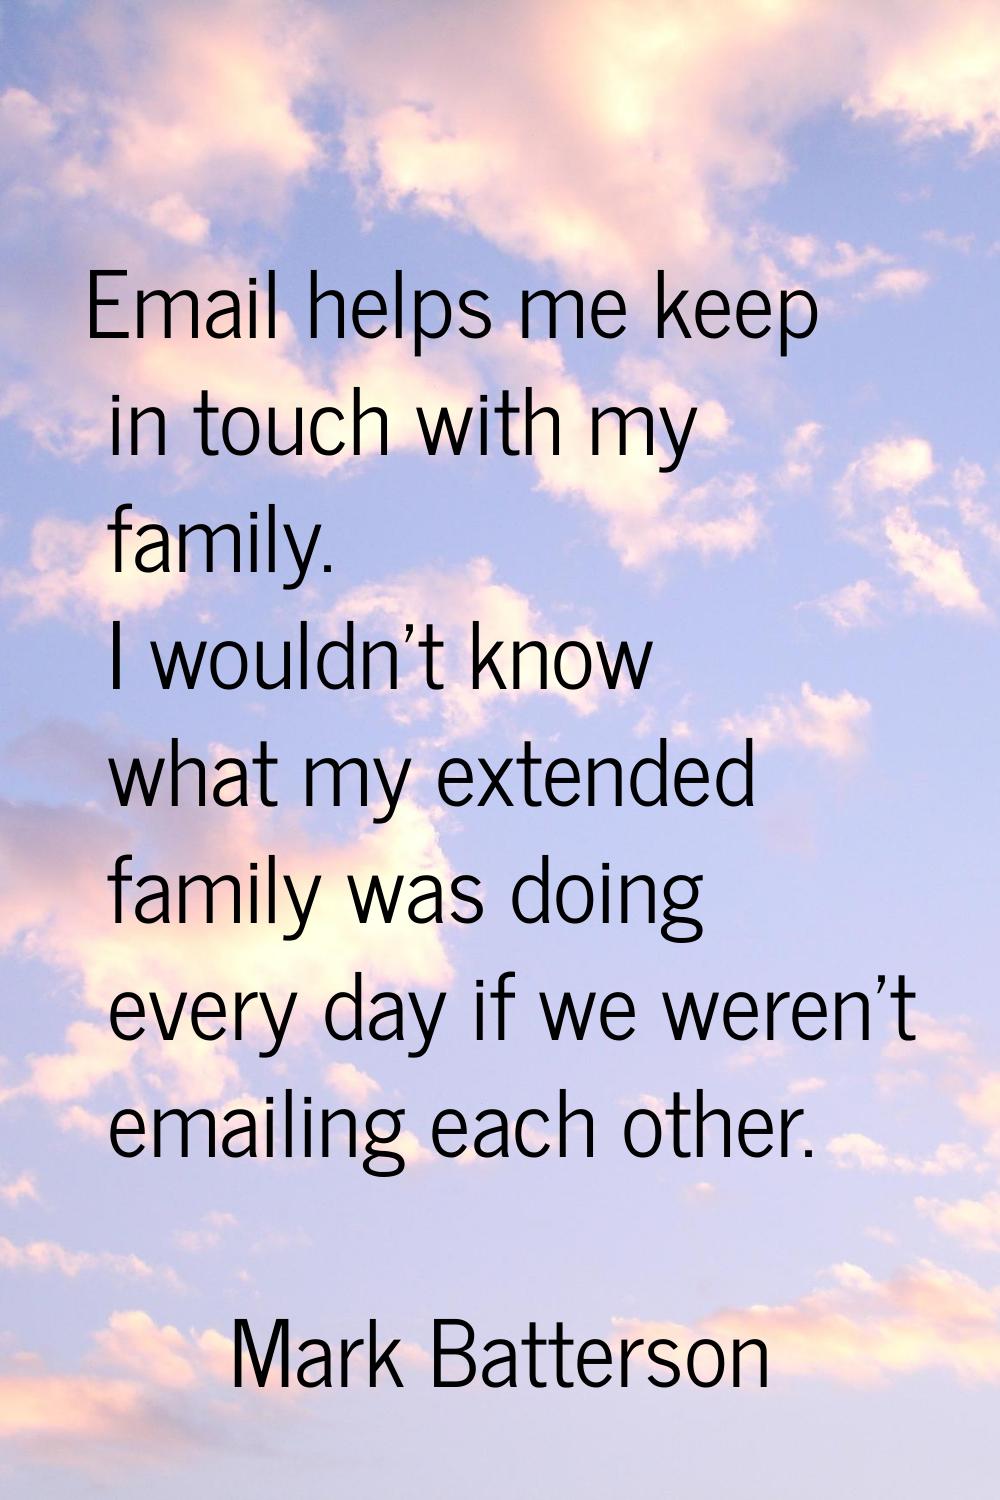 Email helps me keep in touch with my family. I wouldn't know what my extended family was doing ever